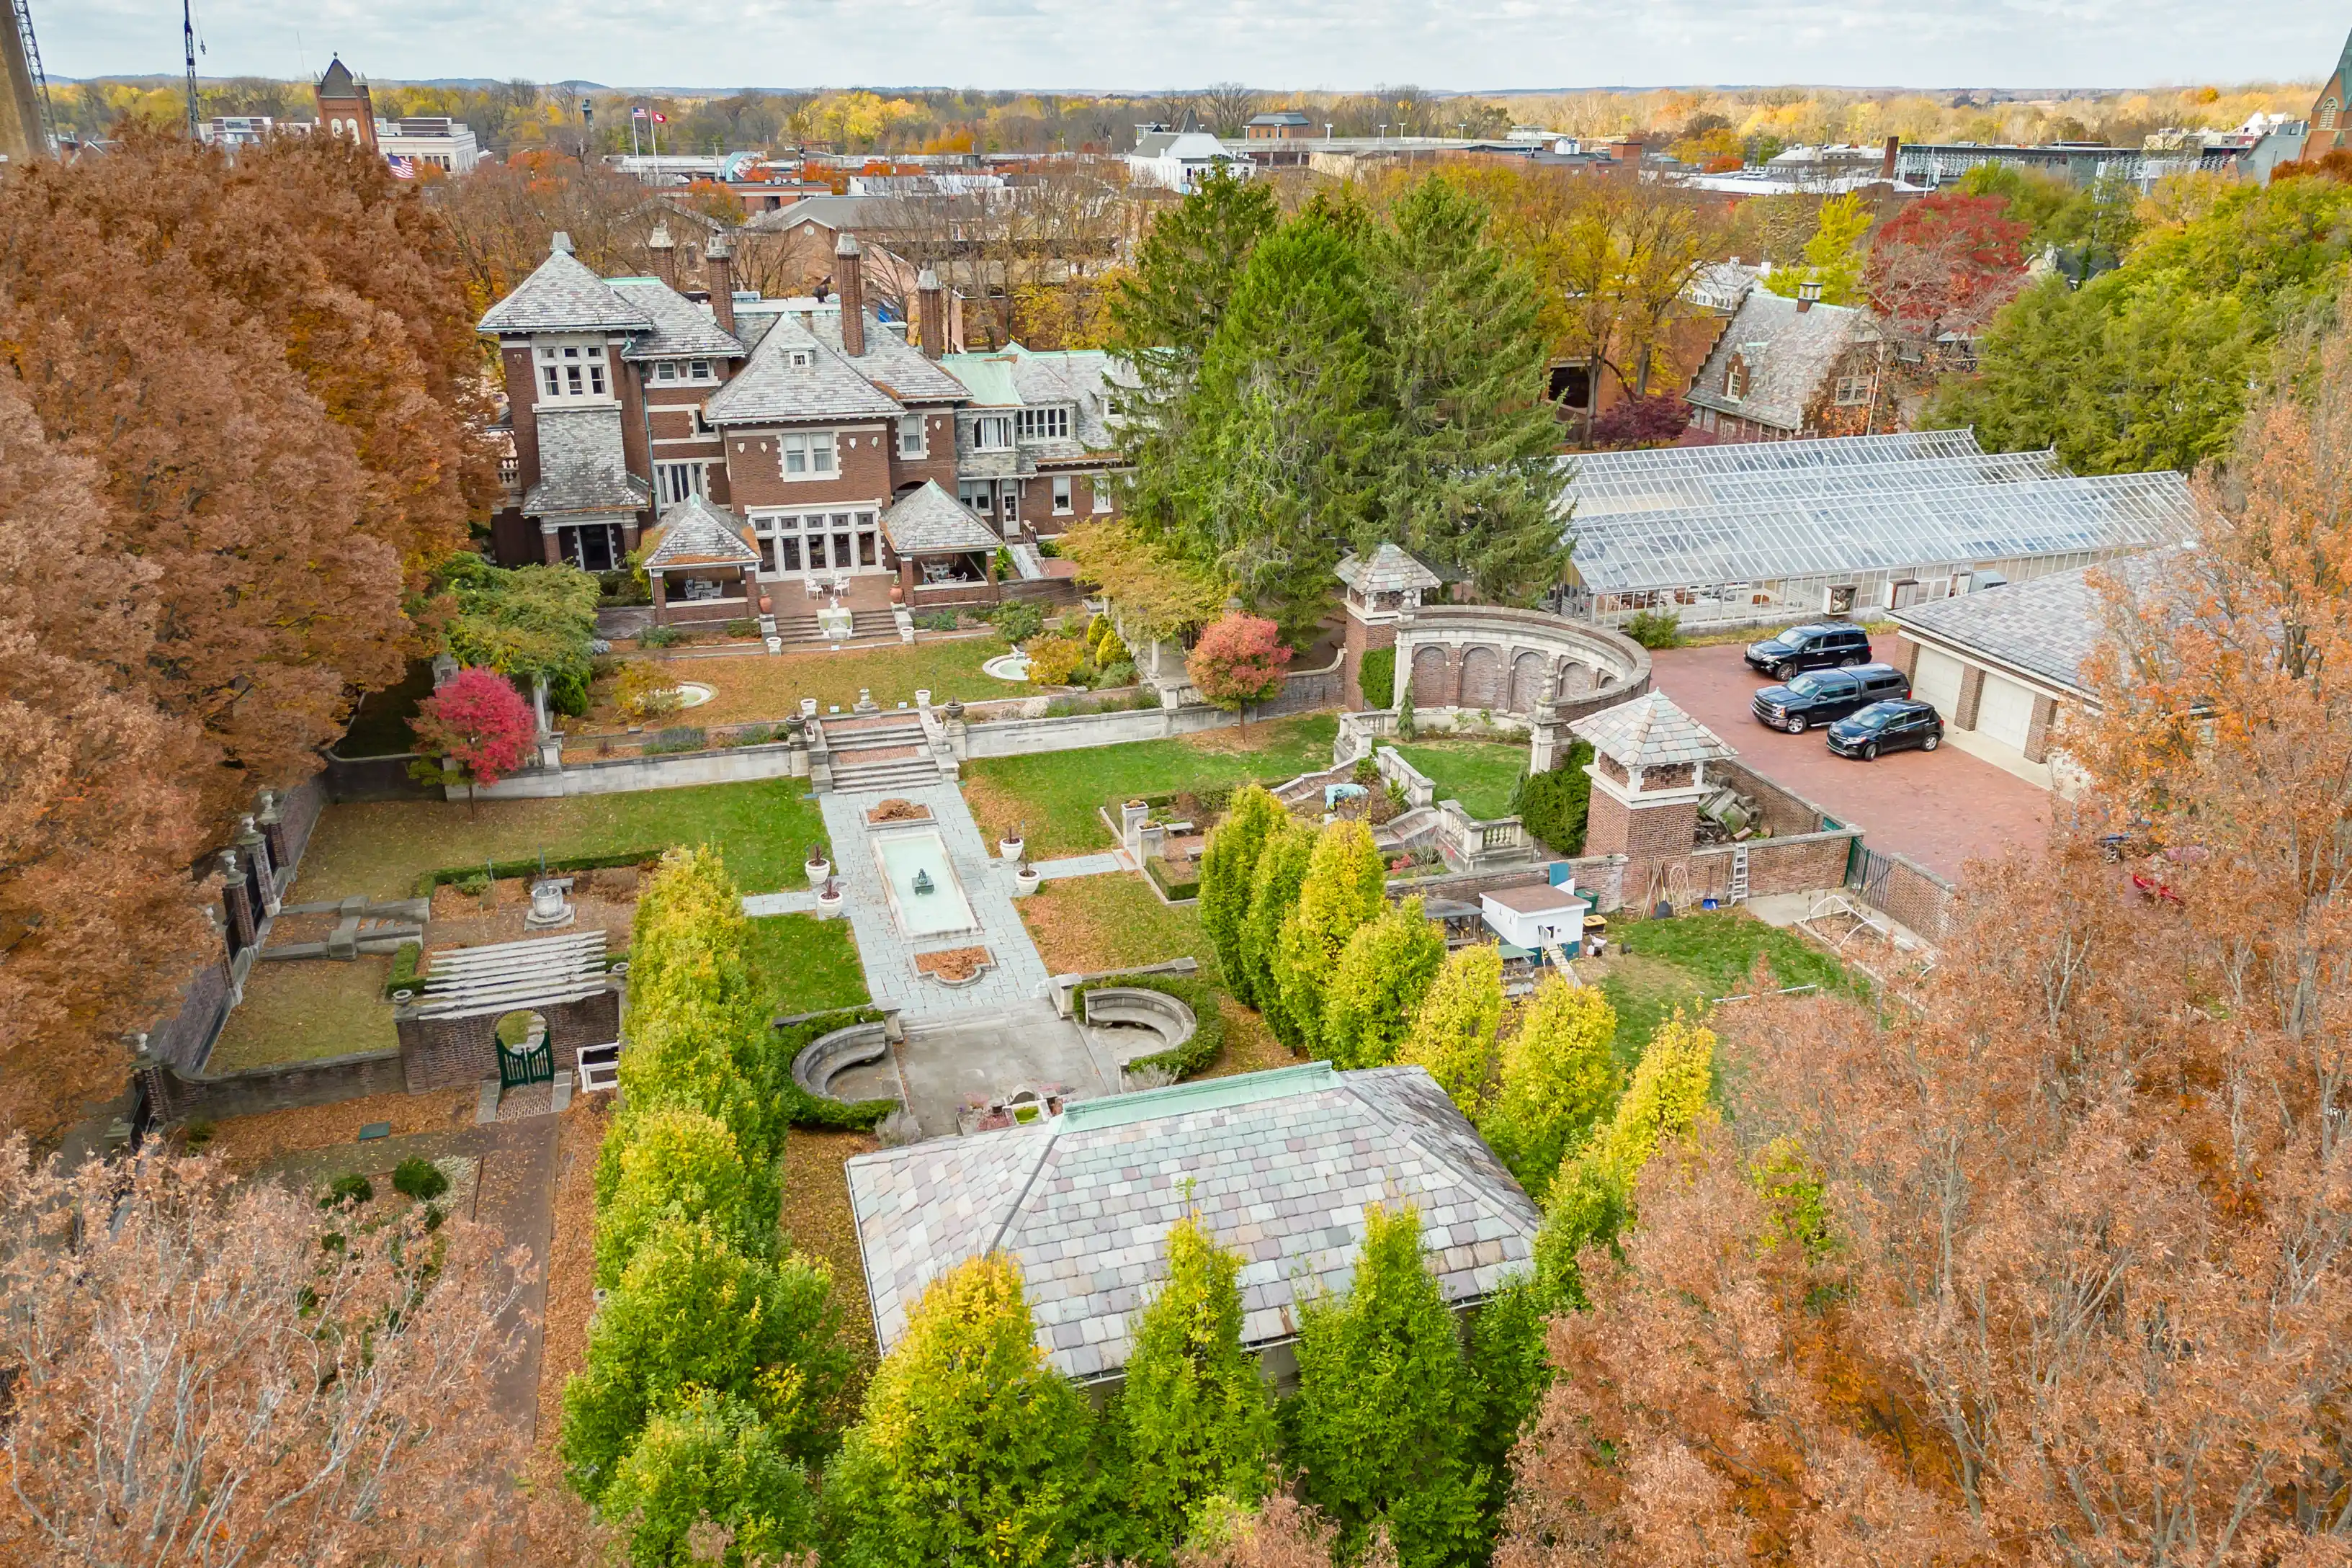 Aerial view of a stately historic mansion with formal gardens and autumn-colored trees, with a greenhouse and a town in the background.